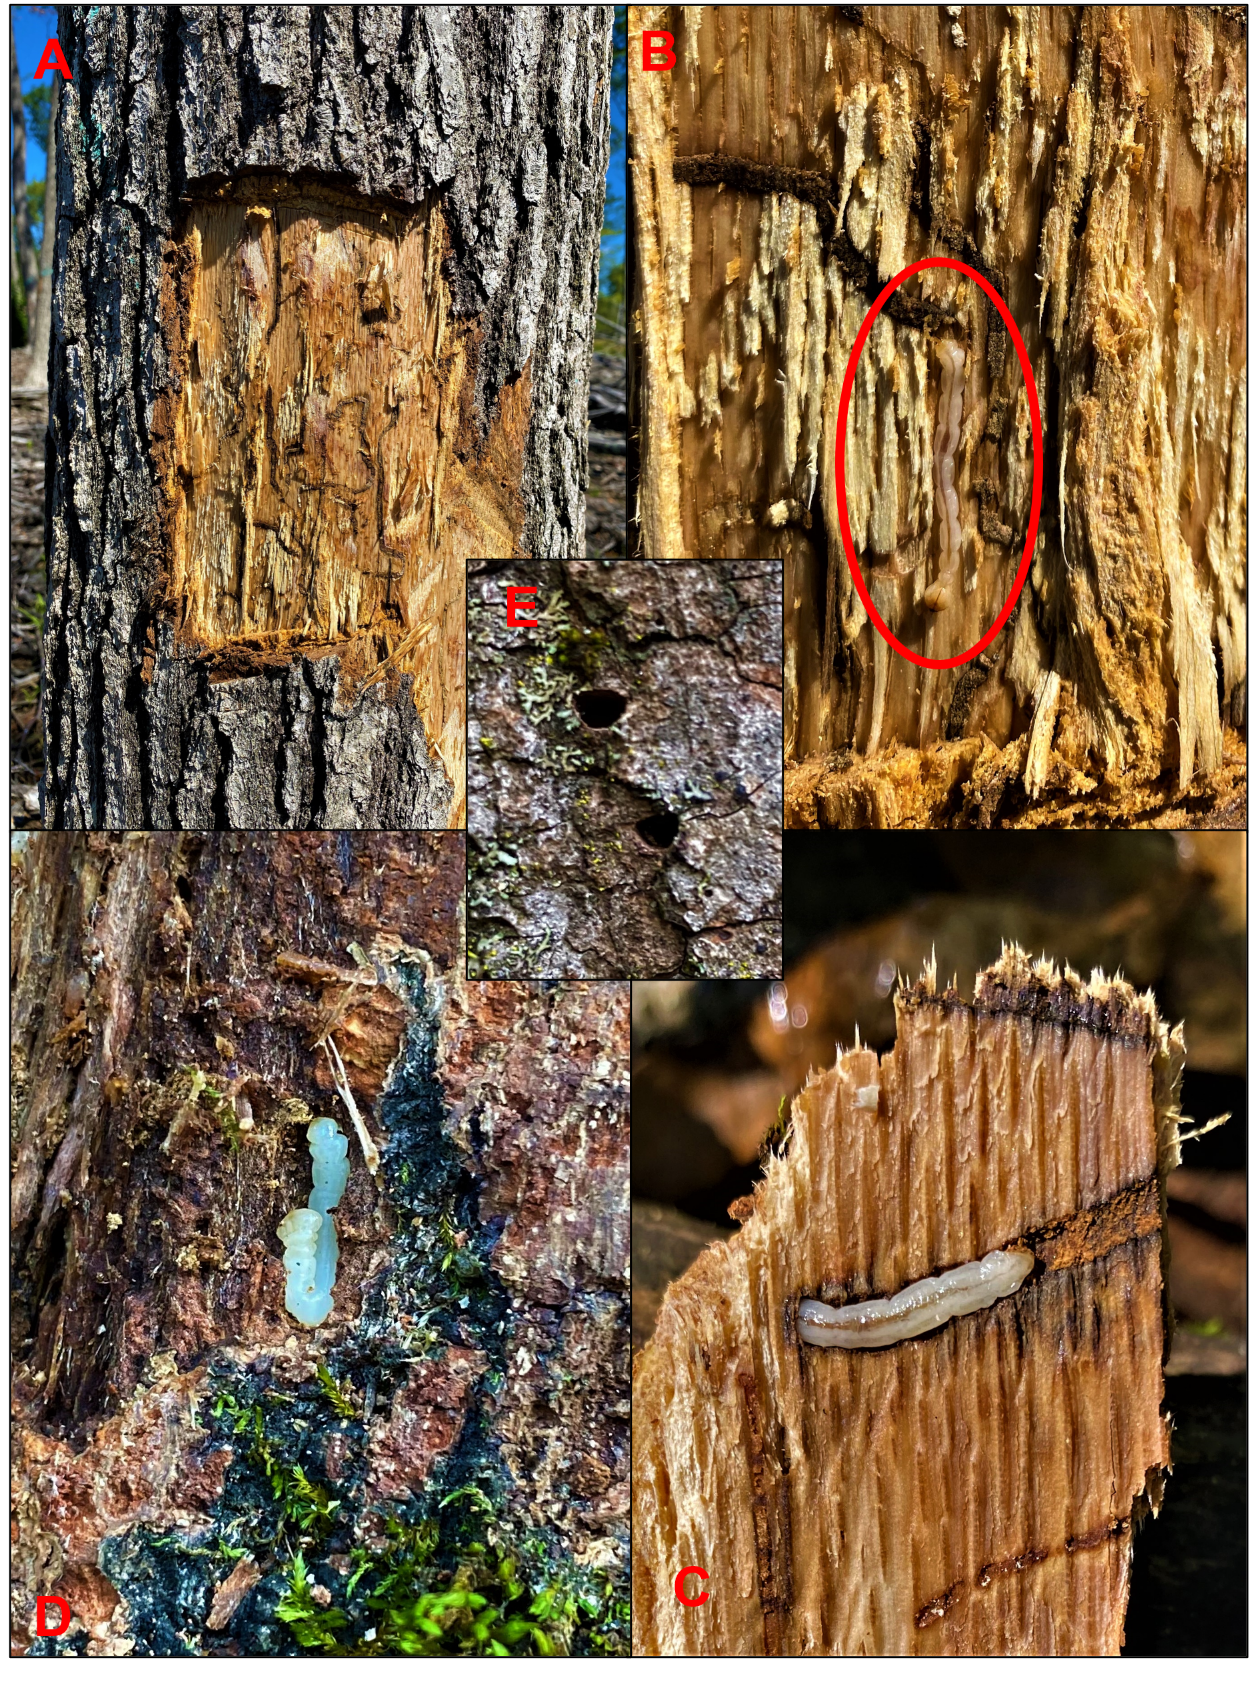 Twolined chestnut borer life stages.